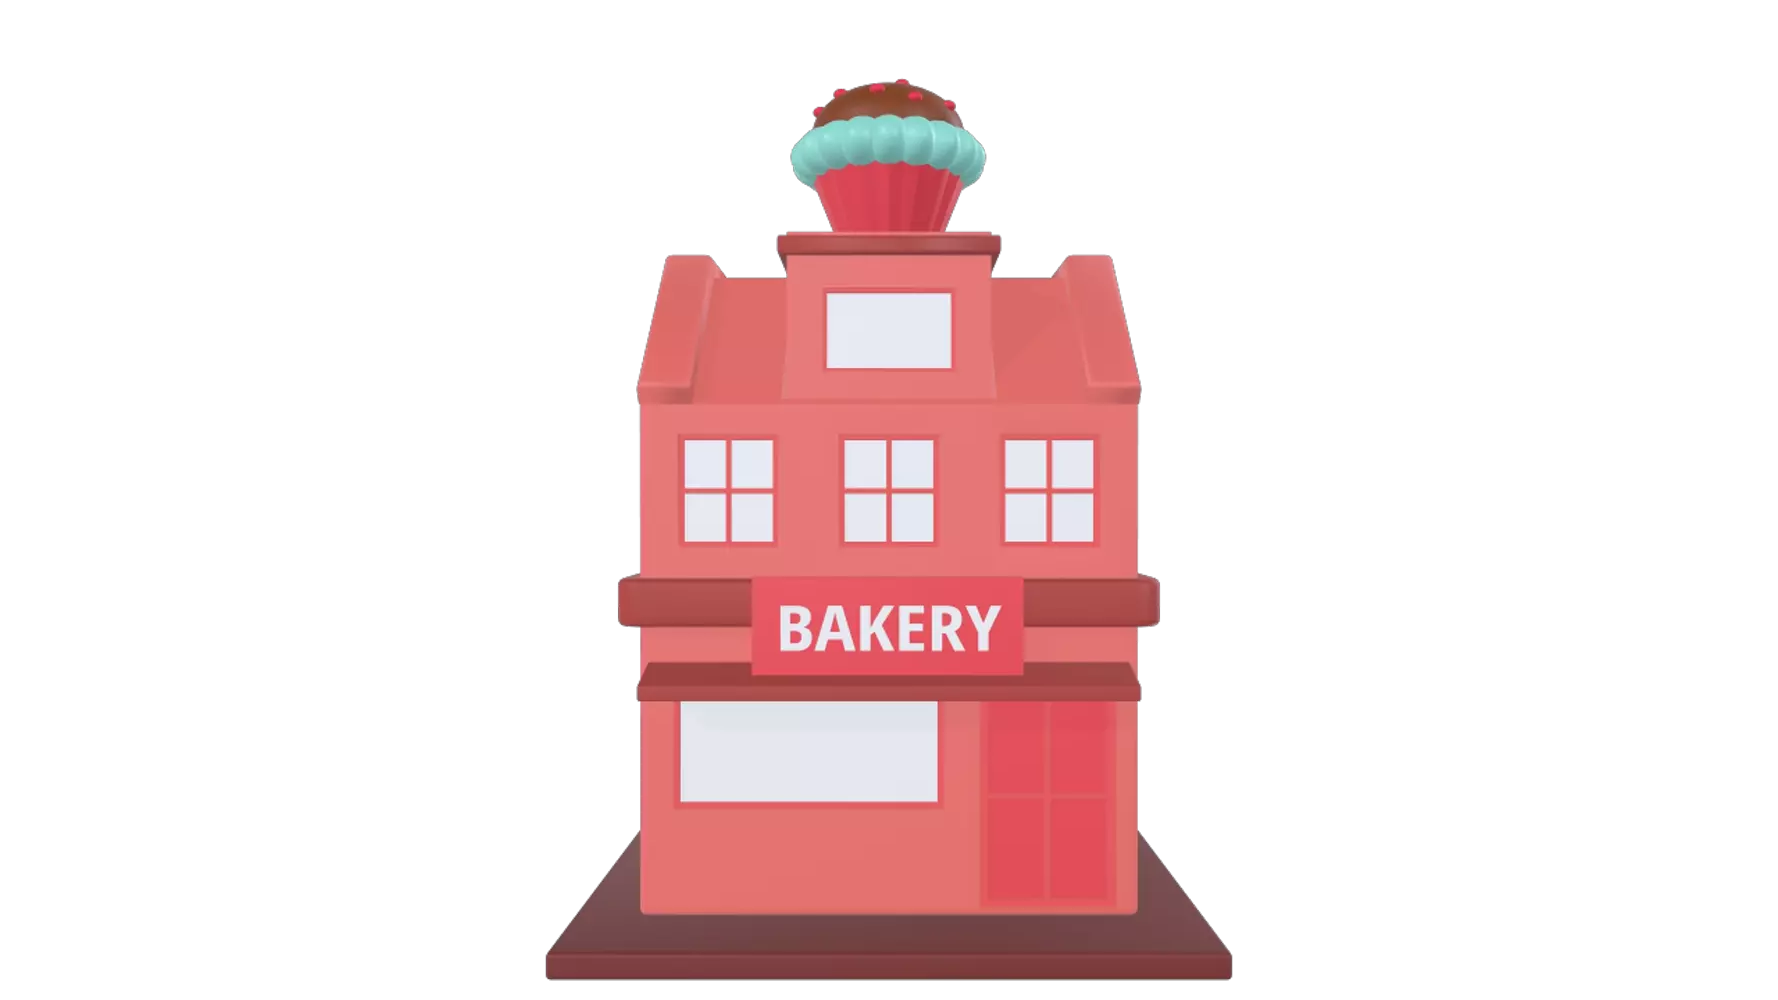 Bakery 3D Graphic